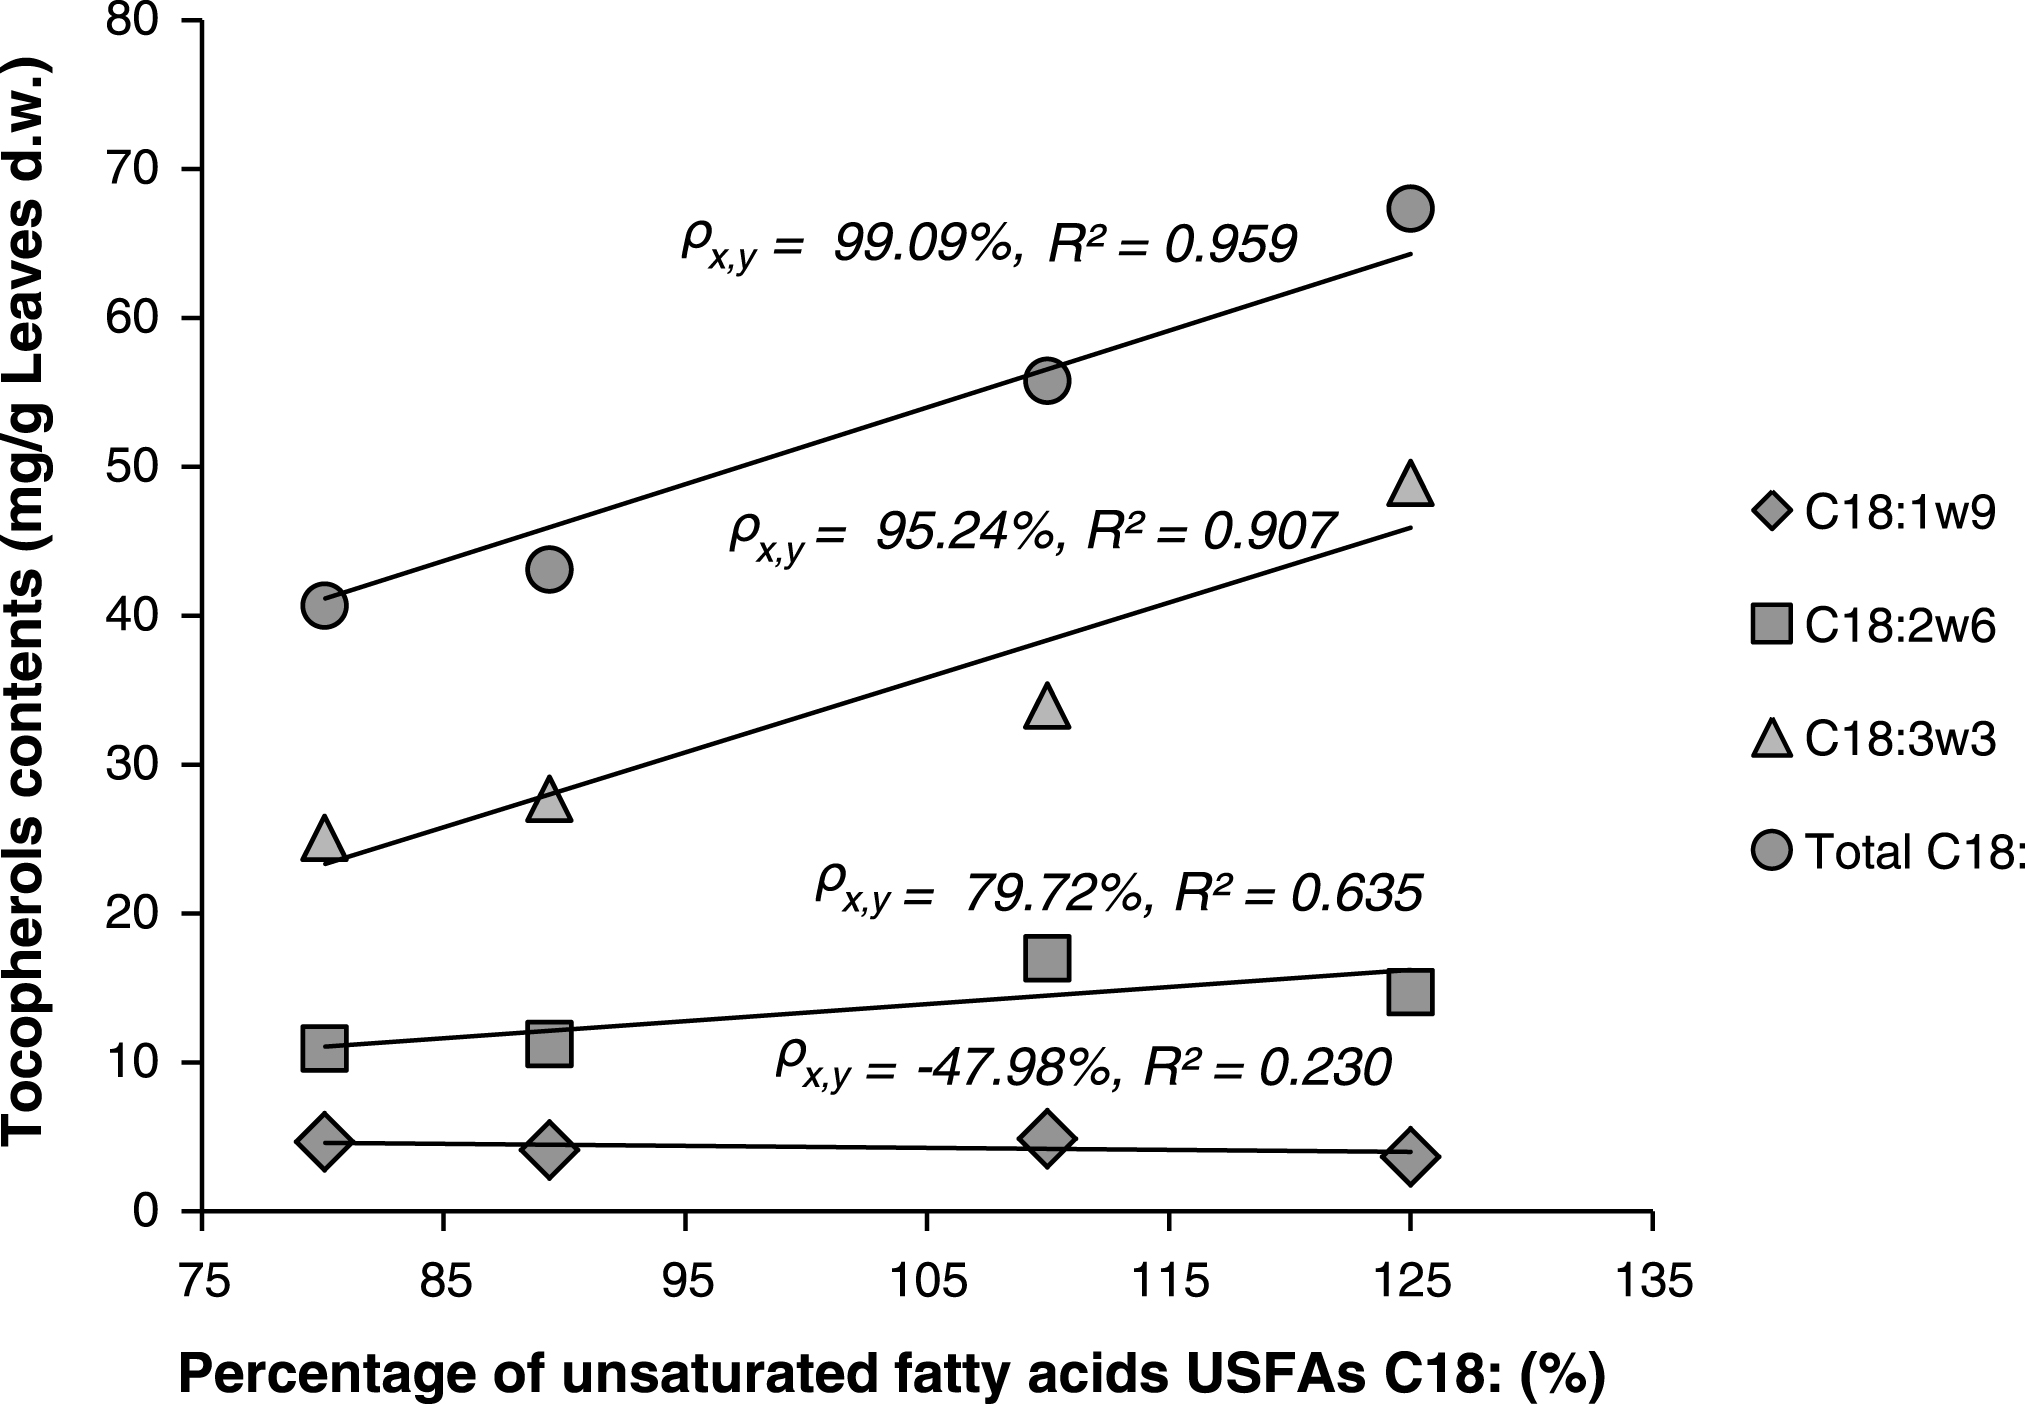 Linear correlations between percentages of unsaturated fatty acids (C18:) and total contents of tocopherols in the lipids of Pistacia lentiscus leaves.